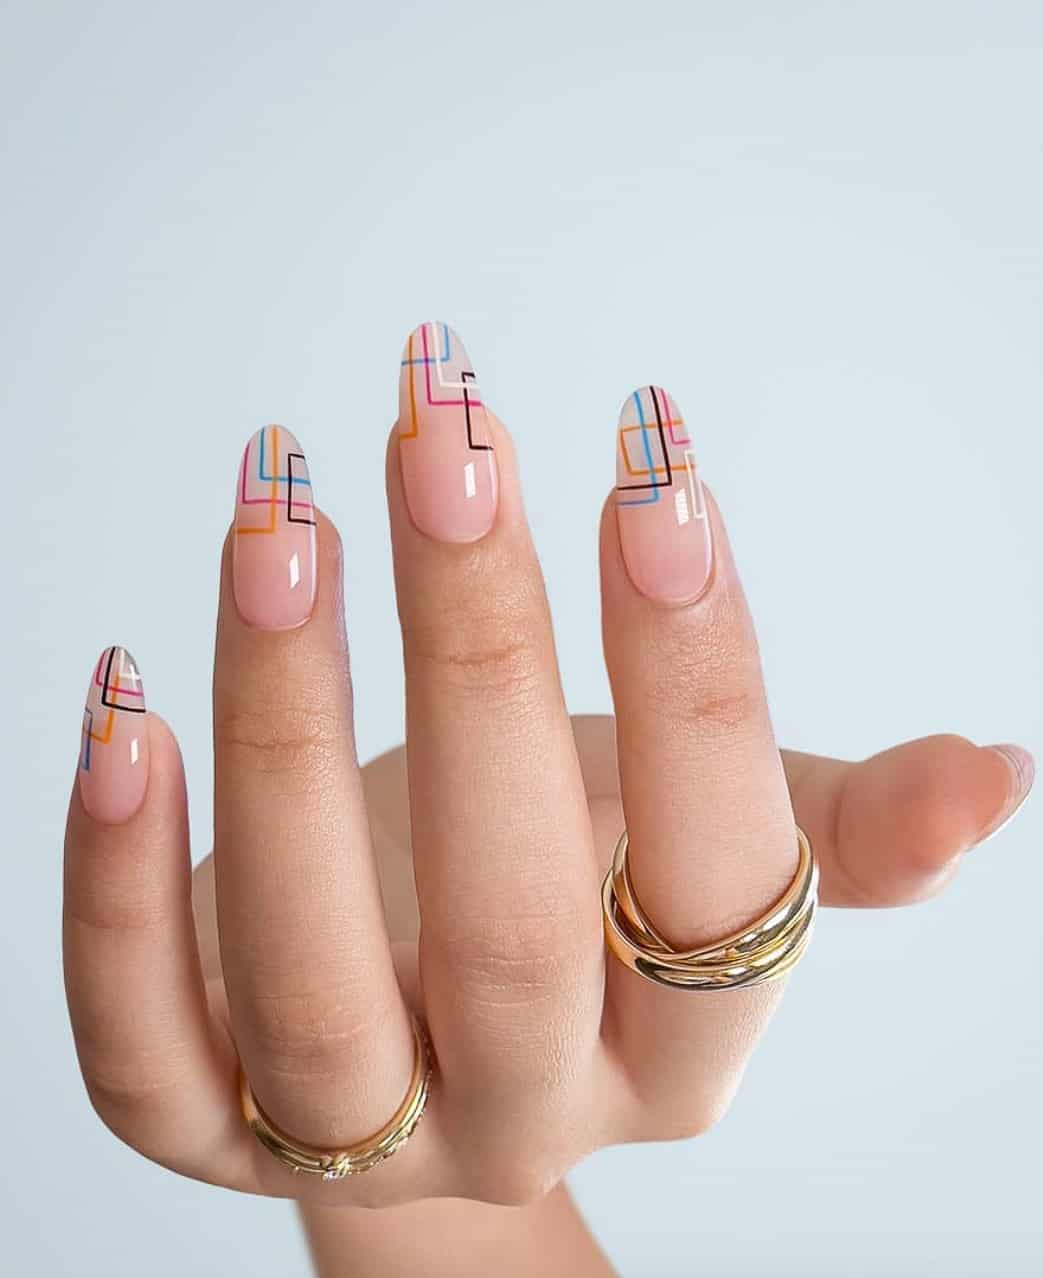 A hand with nude almond nails painted with colorful geometric lines